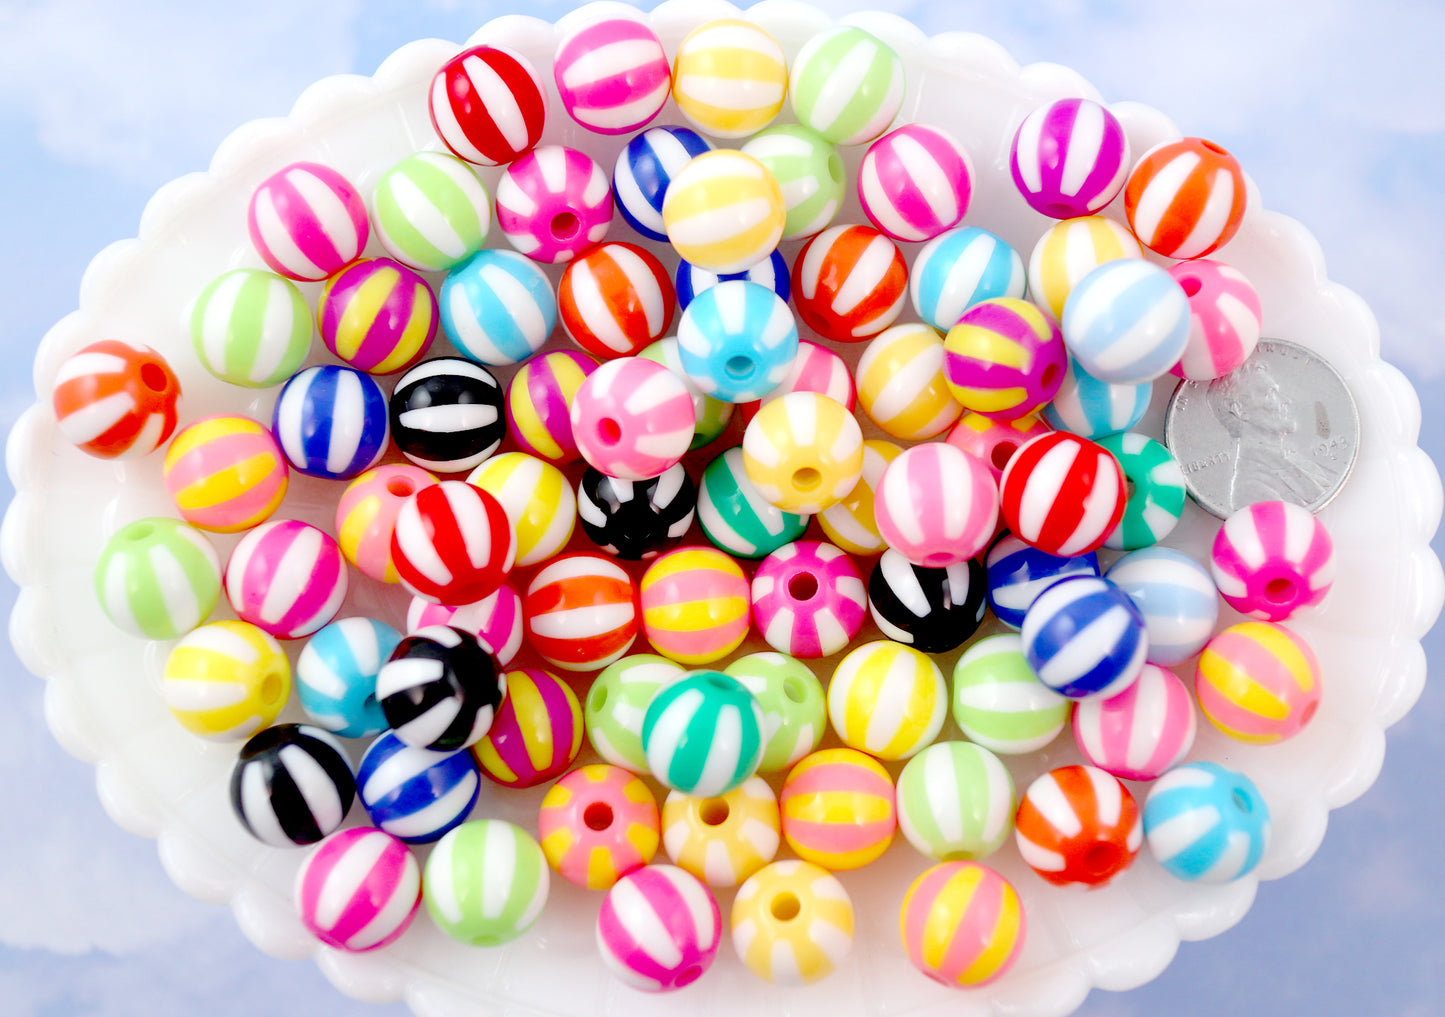 Striped Beads - 12mm Beach Ball Stripe Color Mix Round Resin Beads - 25 pc set